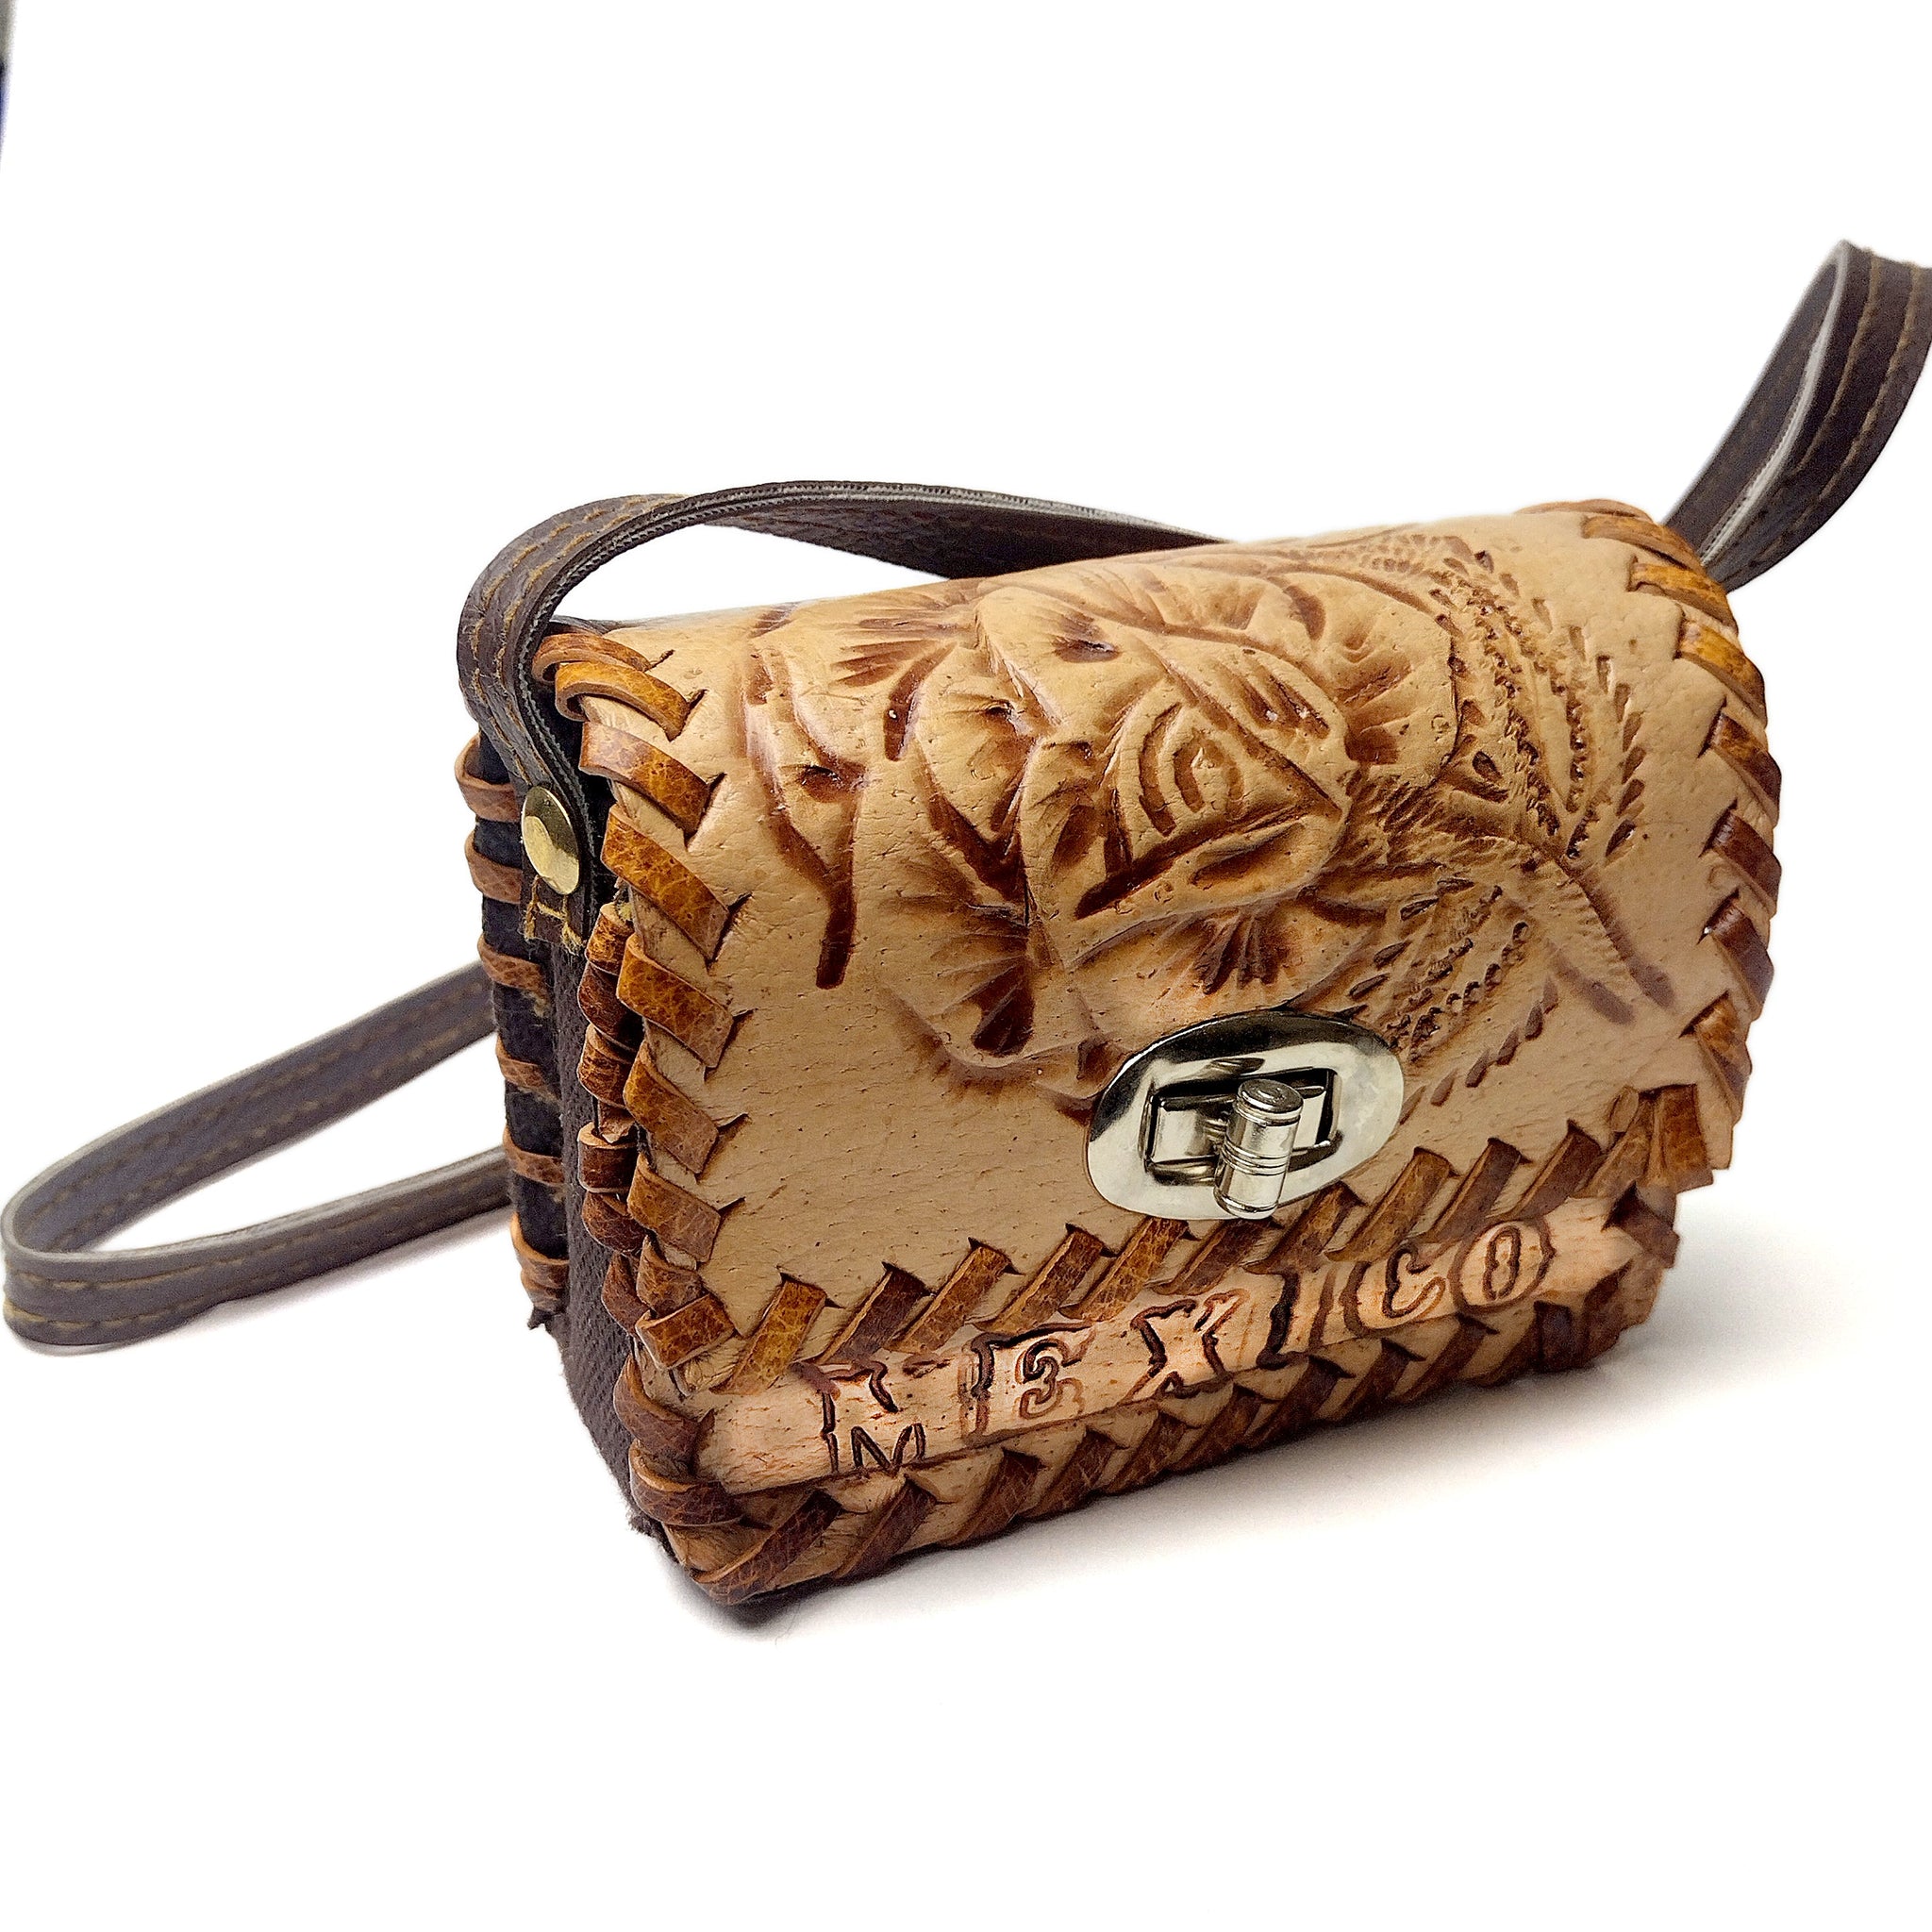 Hand tooled custom order clutch by double j originals | Outfit accessories,  Cowhide bag, Western fashion